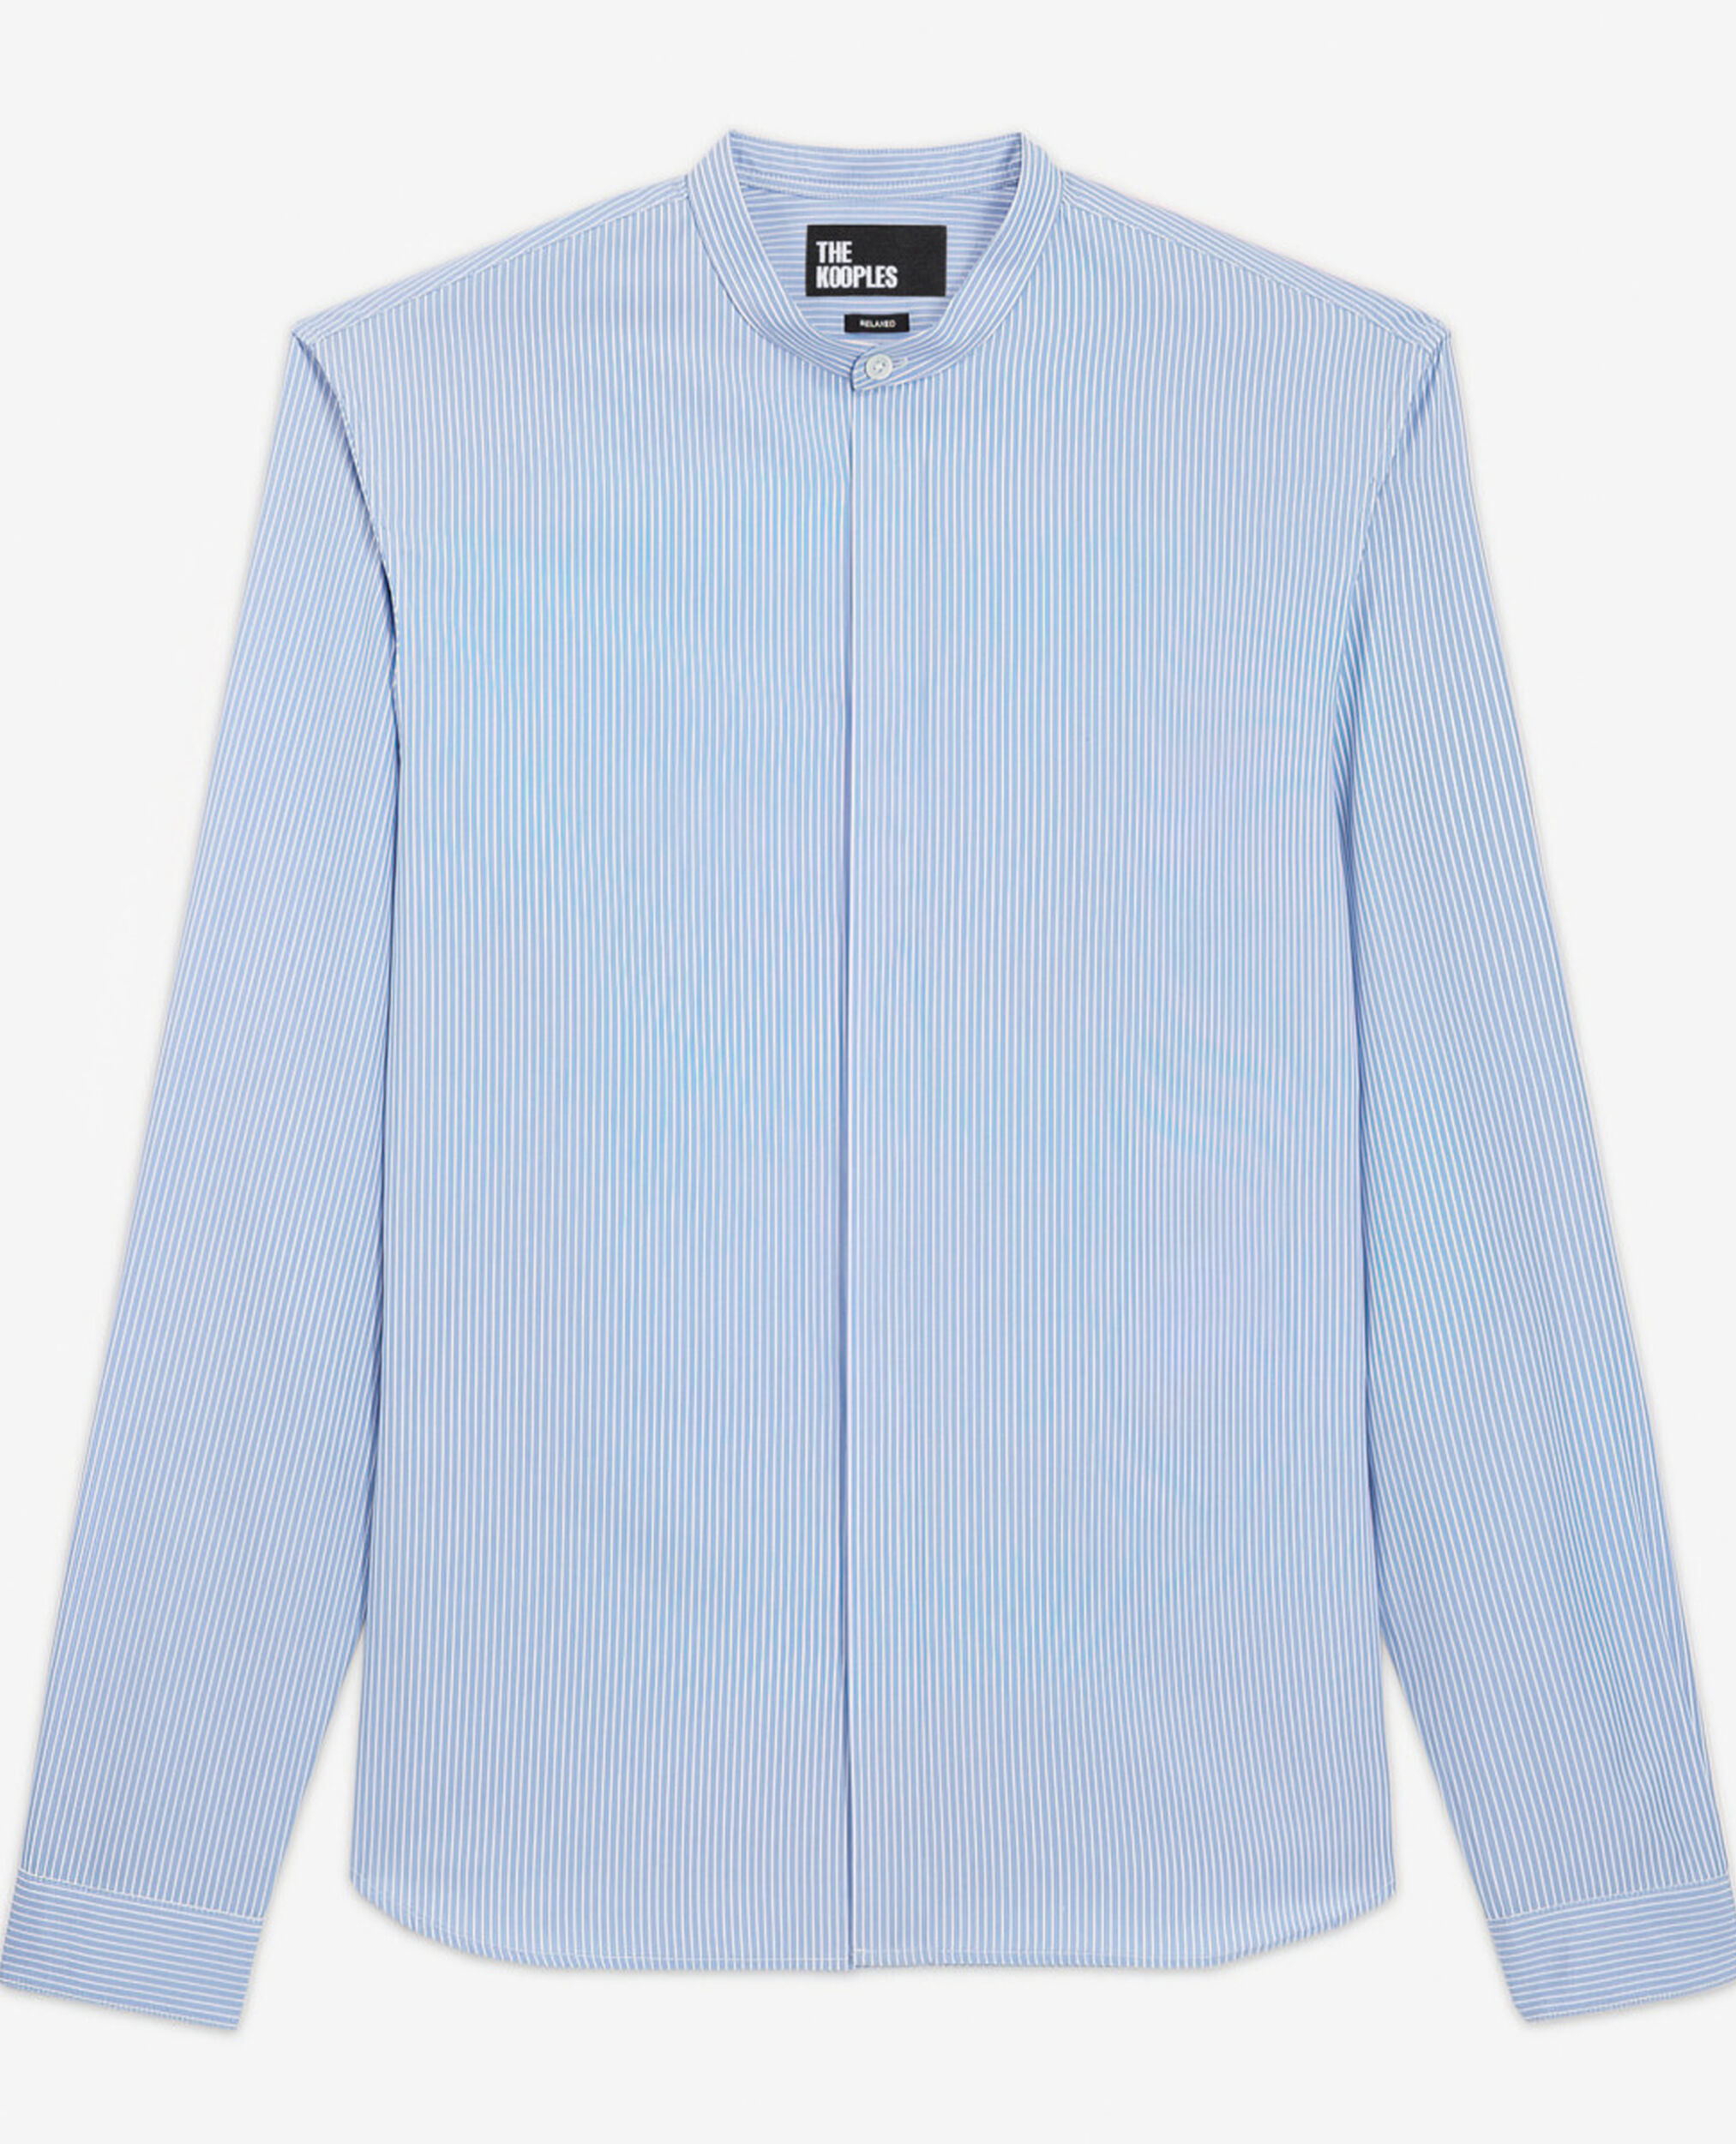 Chemise rayée bleue, WHITE / SKY BLUE, hi-res image number null